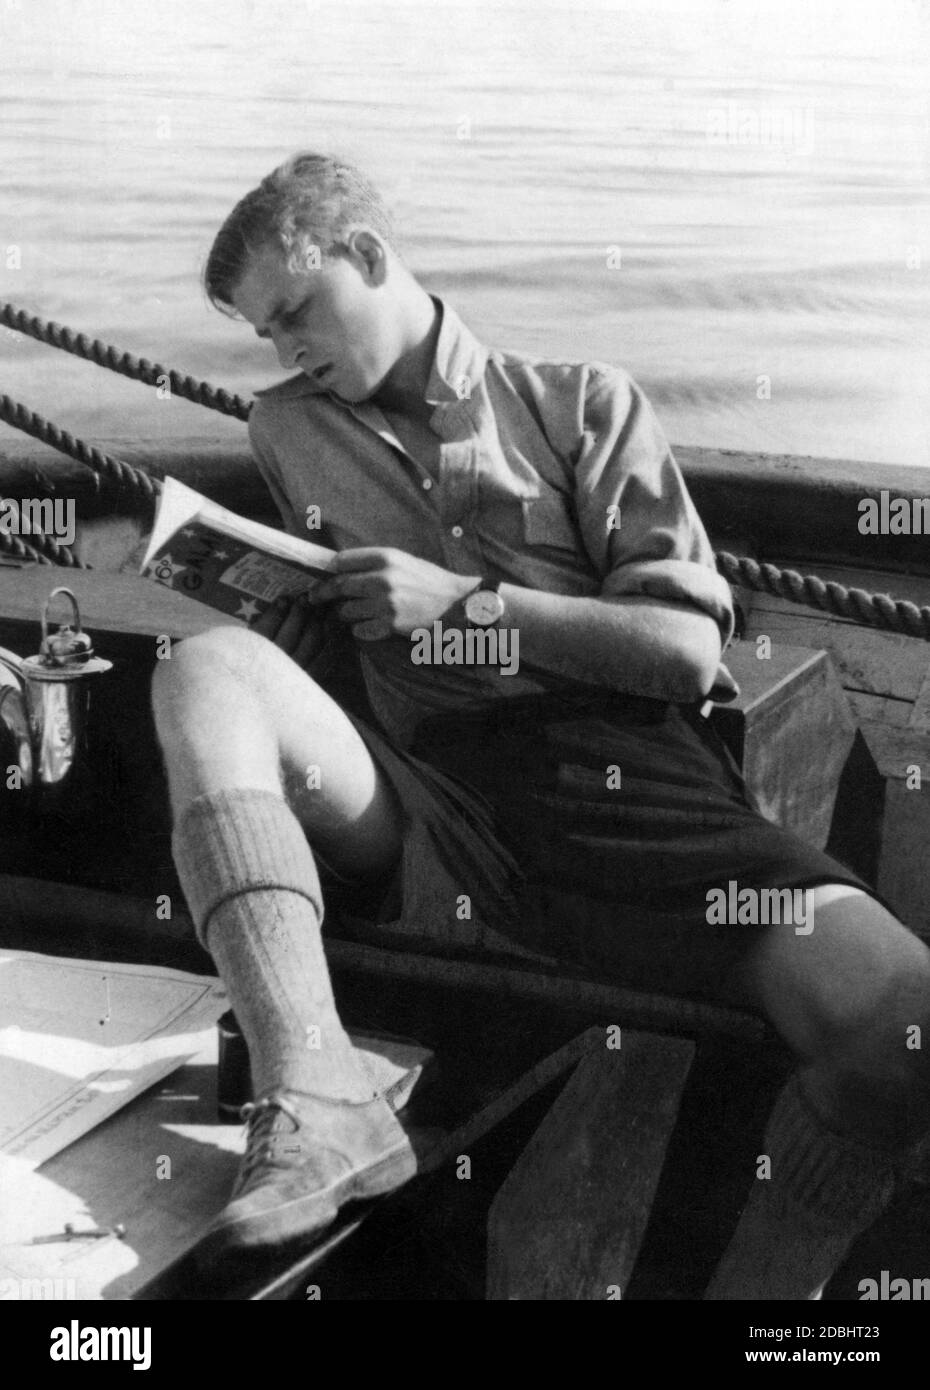 Prince Philip as a schoolboy in a boarding school on board the school boat of the German pedagogue Dr. Hahn. Undated photo, ca. 1934. Stock Photo